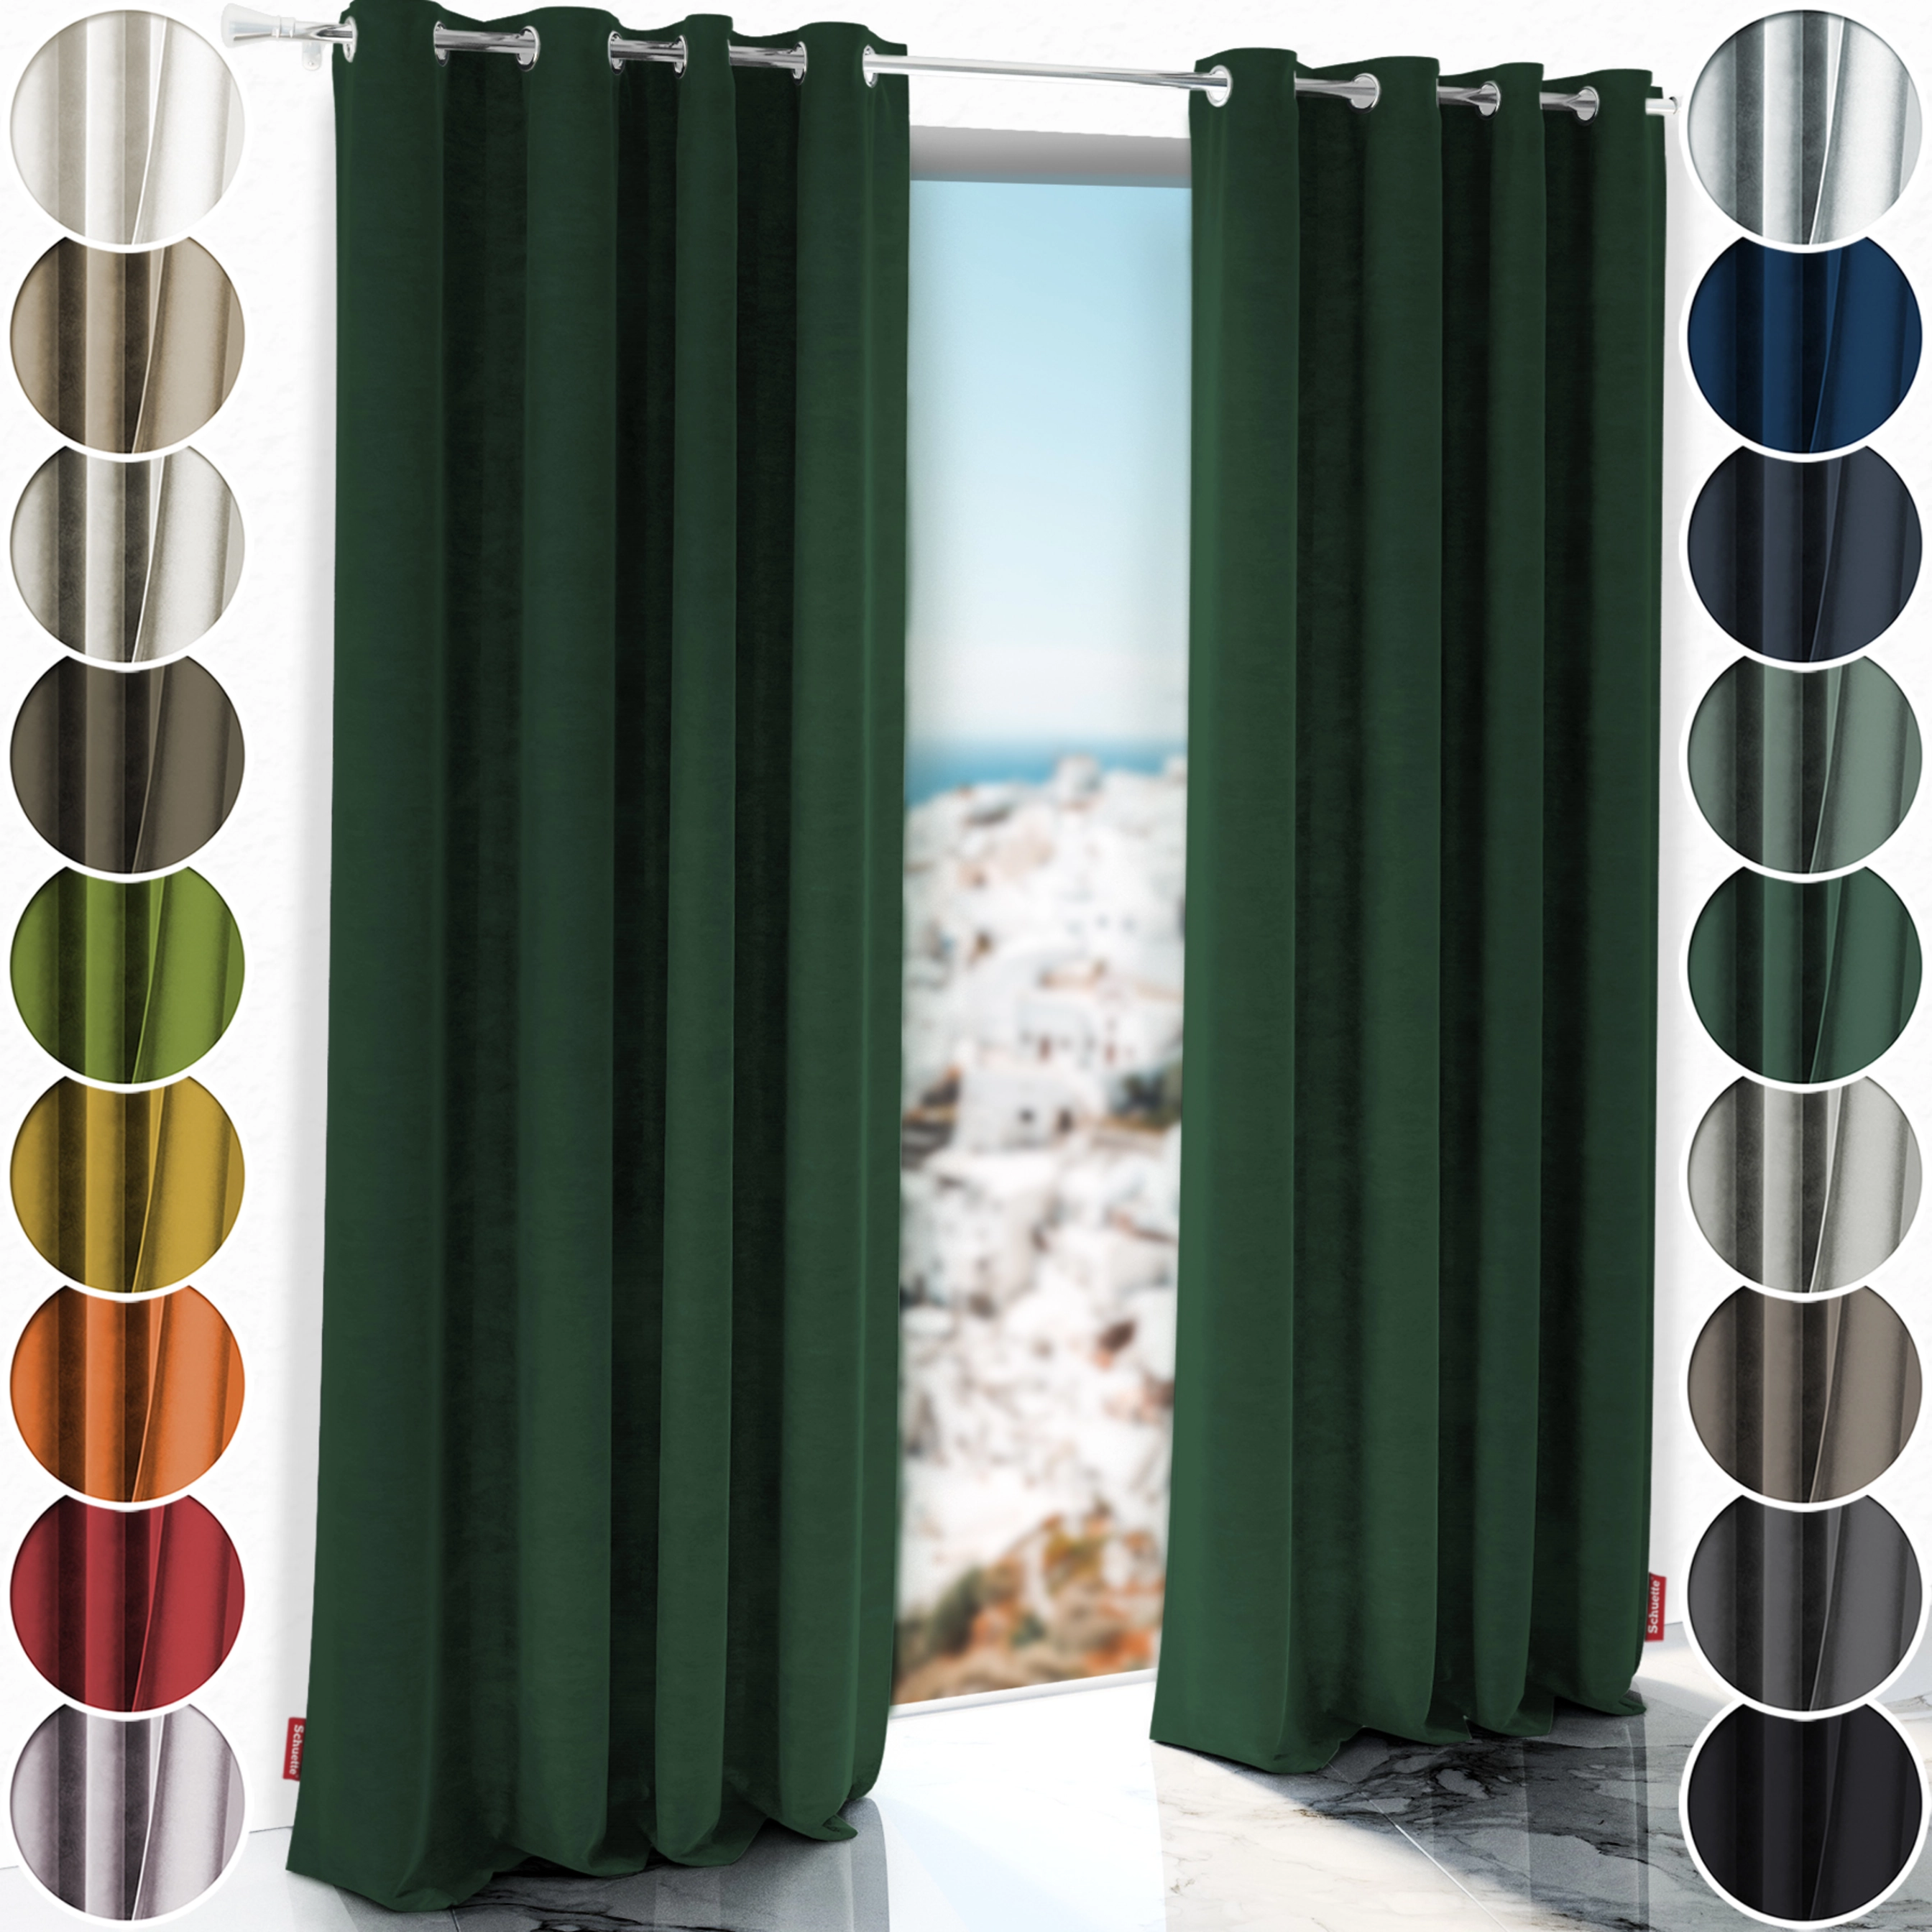 Schuette® Blackout Curtain with Eyelets ● Millenium Velvet Collection: Dark Forest (dark green) ● 1 piece ● Crease-resistant Easy-care Thermo Opaque & heavily darkening